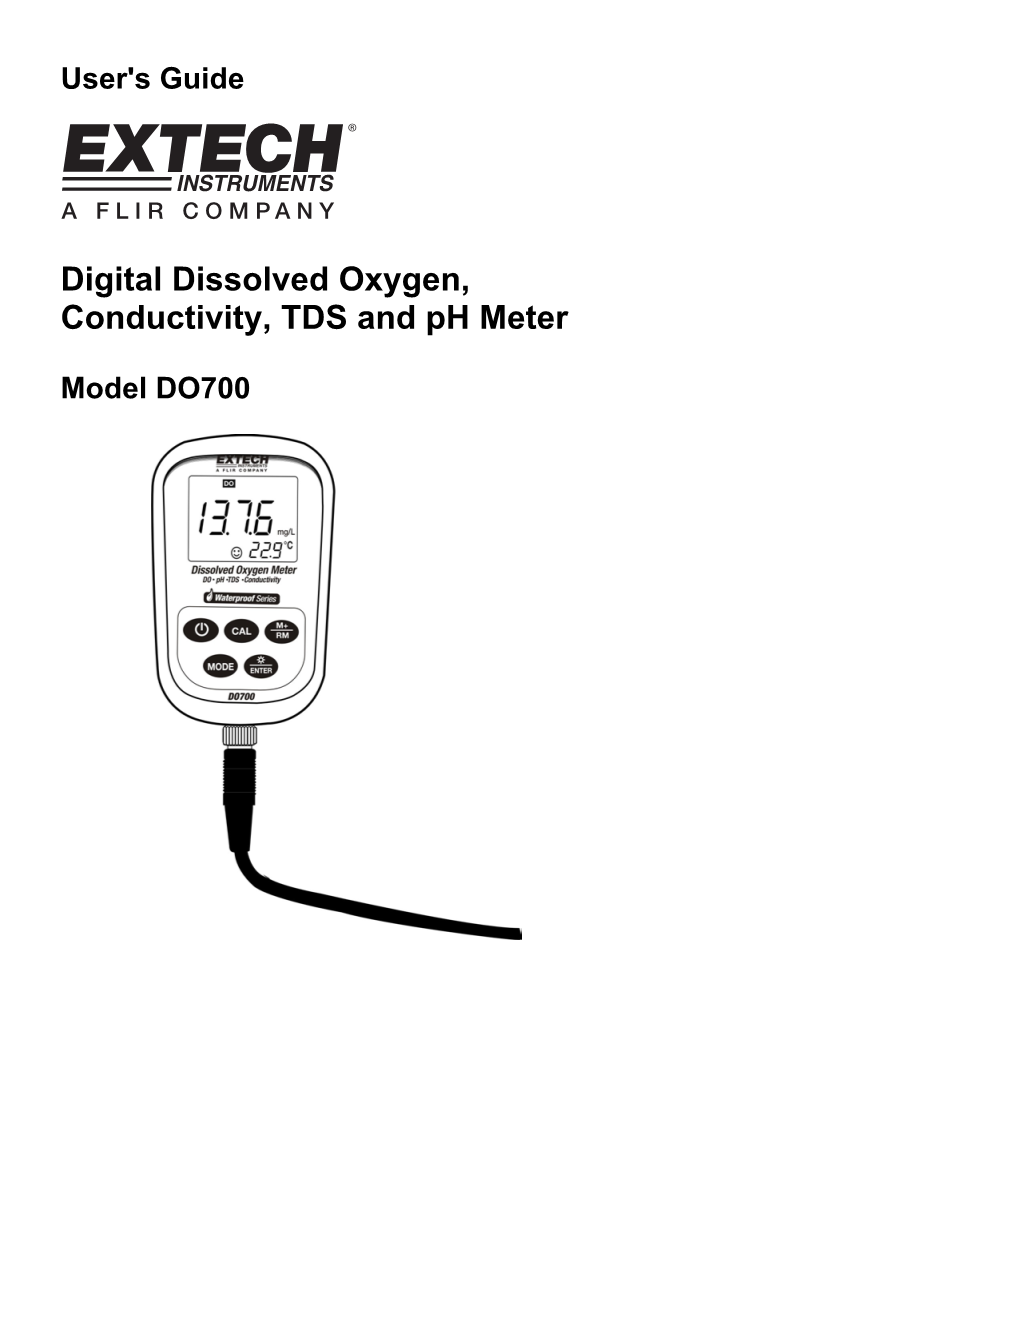 Digital Dissolved Oxygen, Conductivity, TDS and Ph Meter